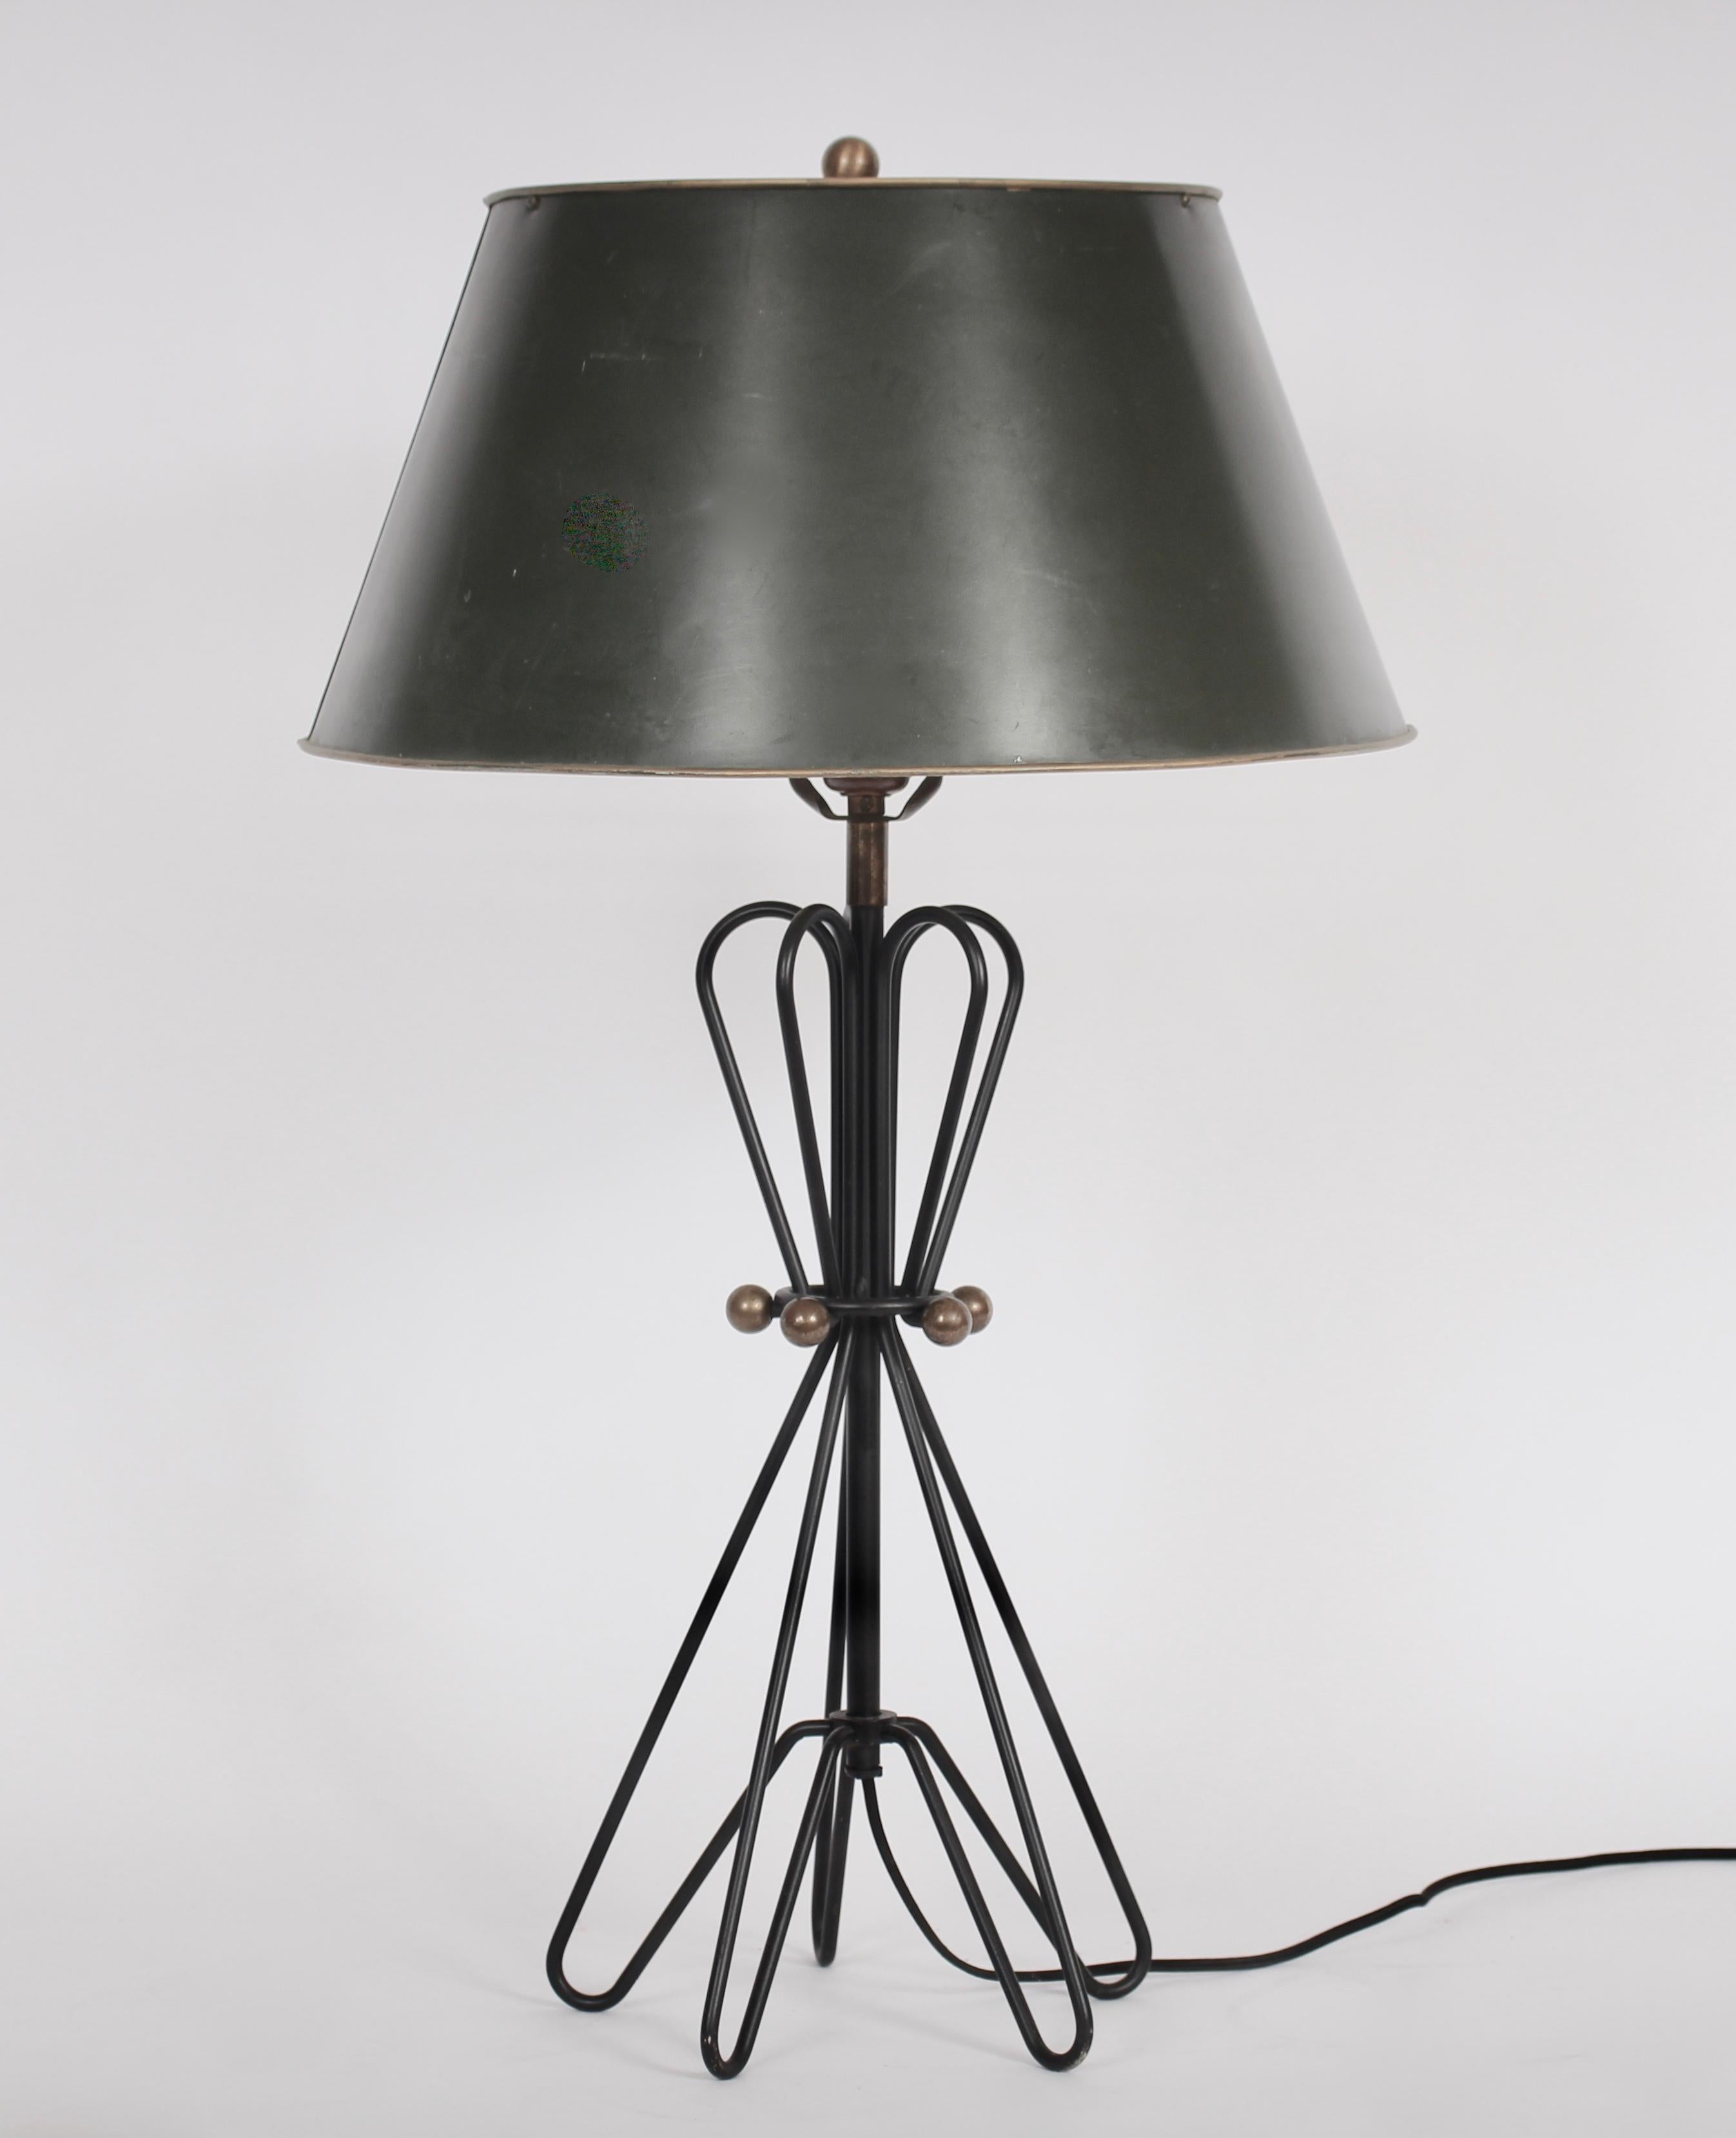 French Modern Verplex black enameled hairpin and loop table lamp, attributed to Tony Paul. Featuring five black enameled Iron wire hairpin legs, collar ring detailed with five brass balls. 20H to top of socket. Shade shown for display only (9H x 11D